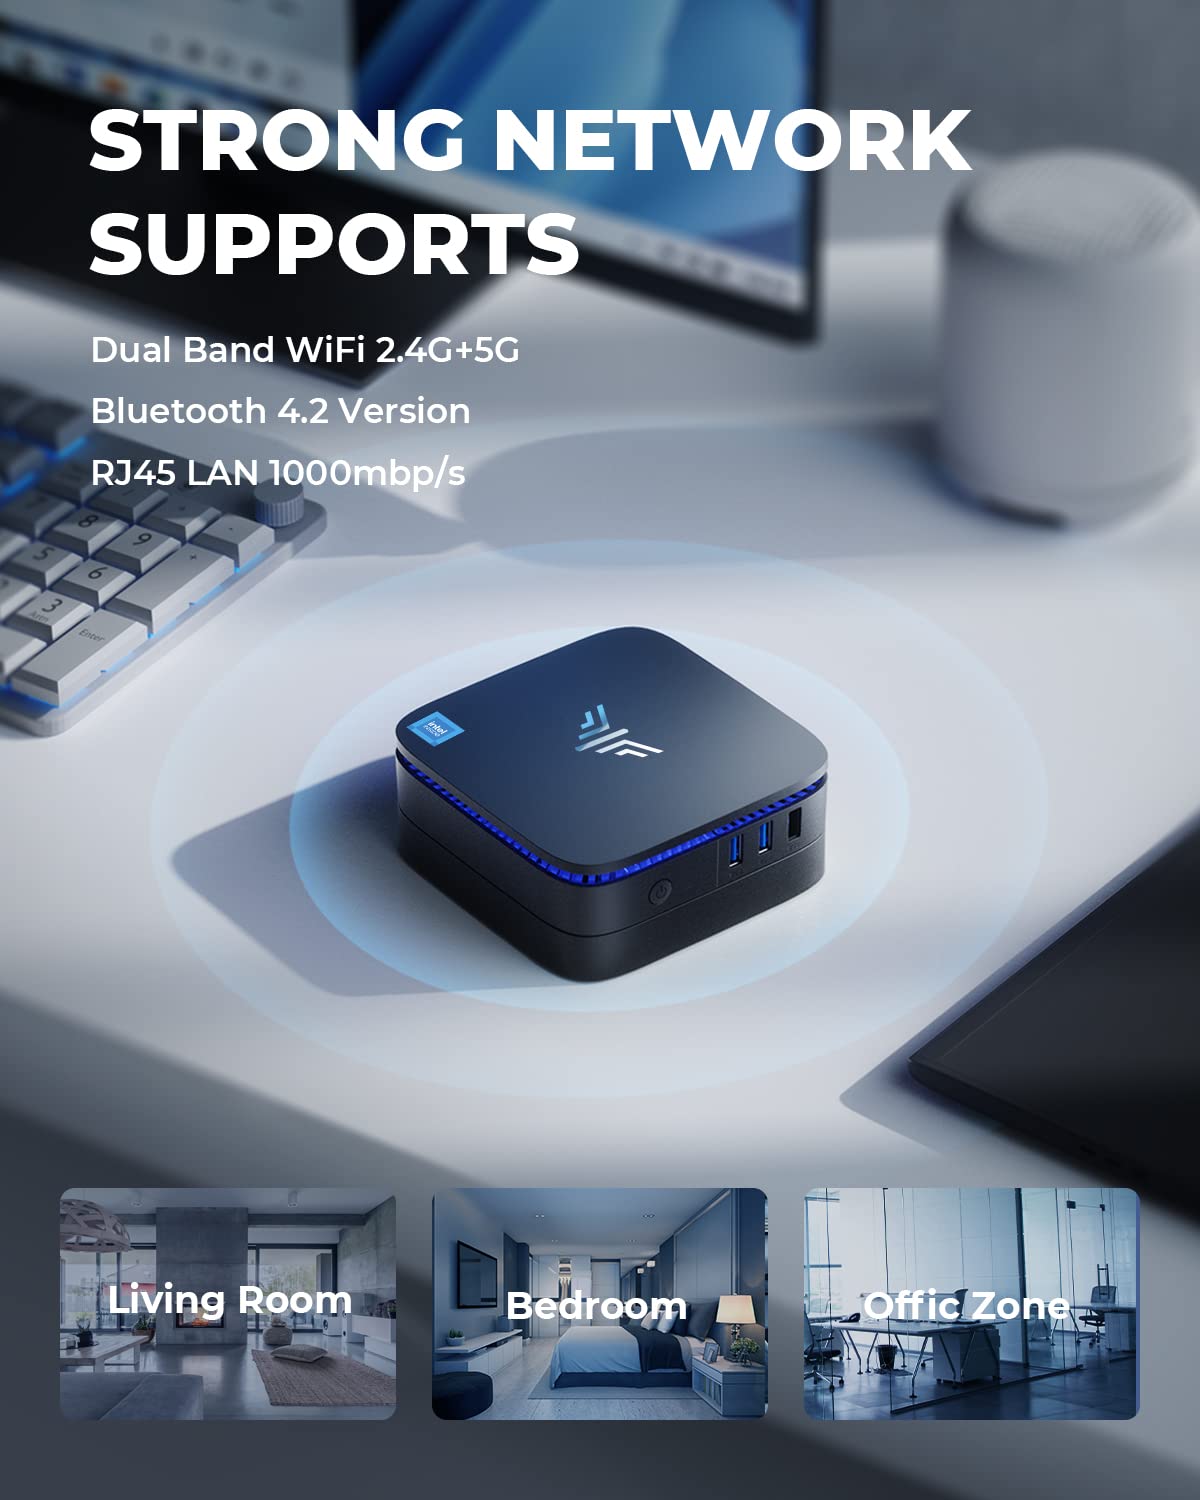 KAMRUI AK1PLUS Mini PC with Intel Alder Lake N95(up to 3.4 GHz), 16GB DDR4 RAM 1TB M.2 NVME SSD Small Desktop Computers, Micro Computer Towers Support 4K UHD for Business Office Industrial IOT Home